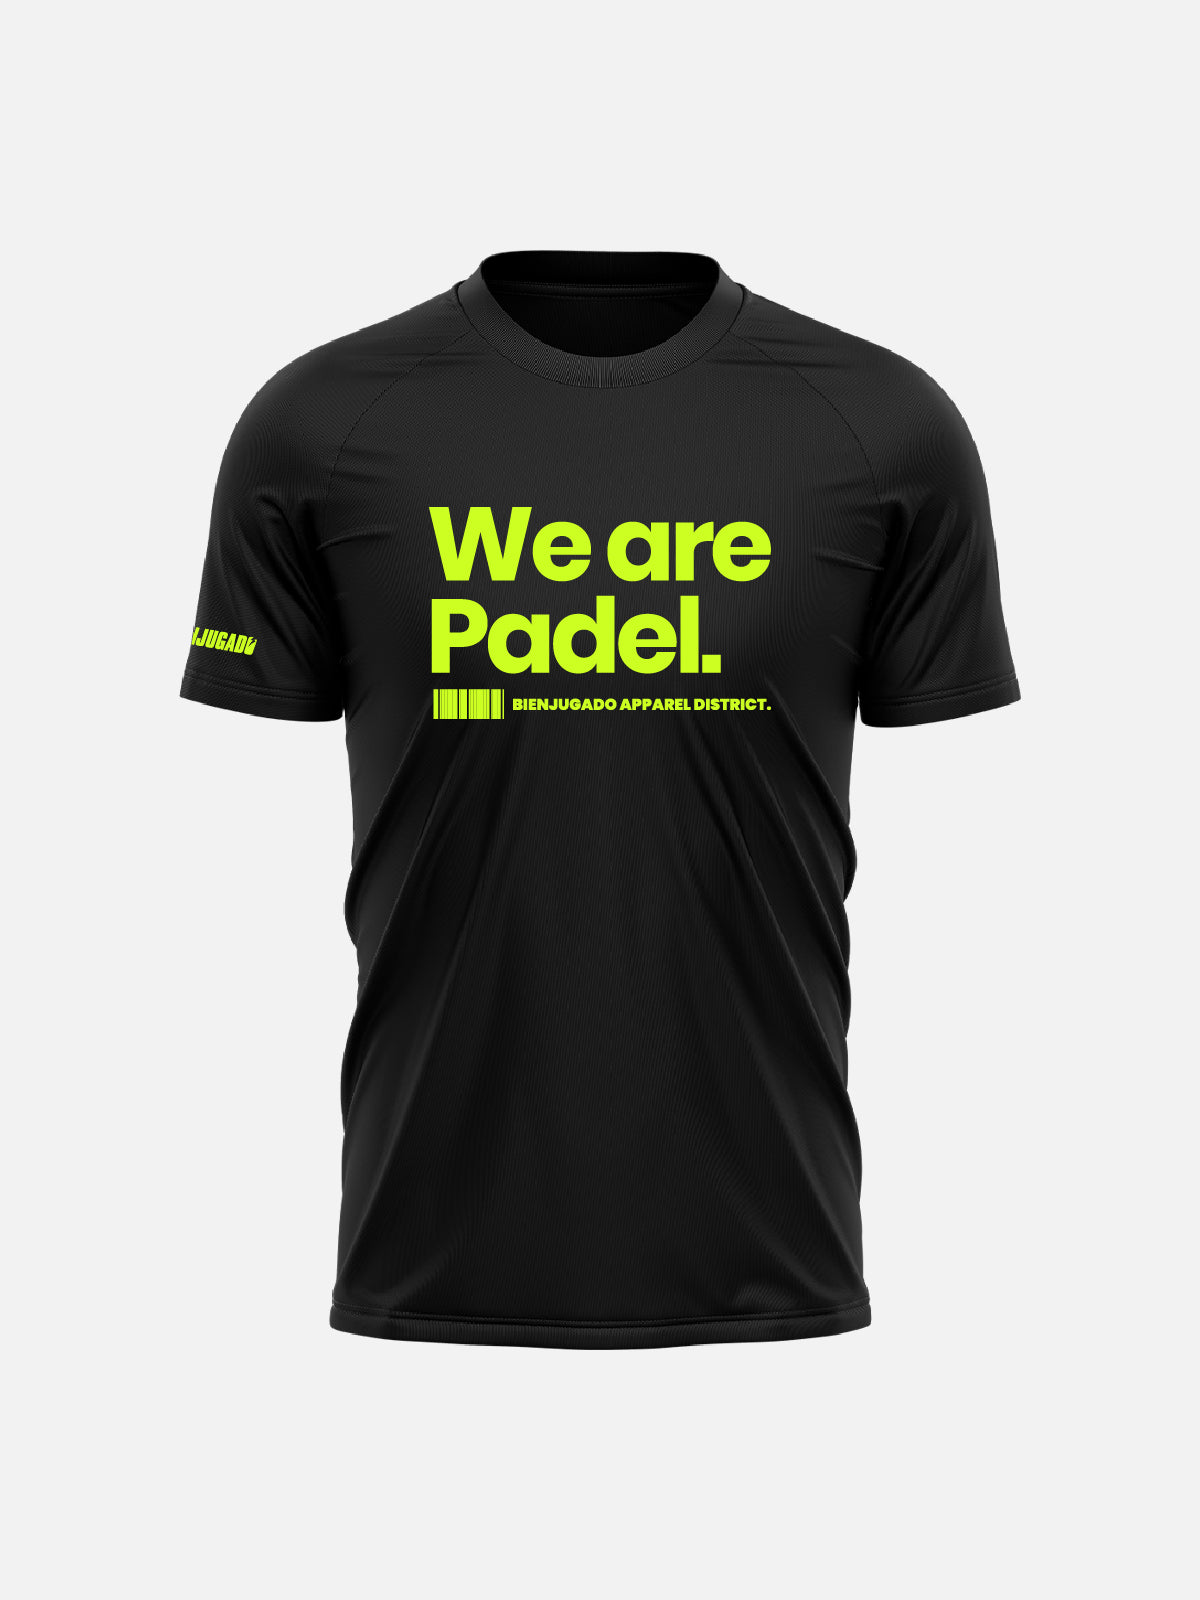 Fun Quick Dry T-Shirt - We Are Padel